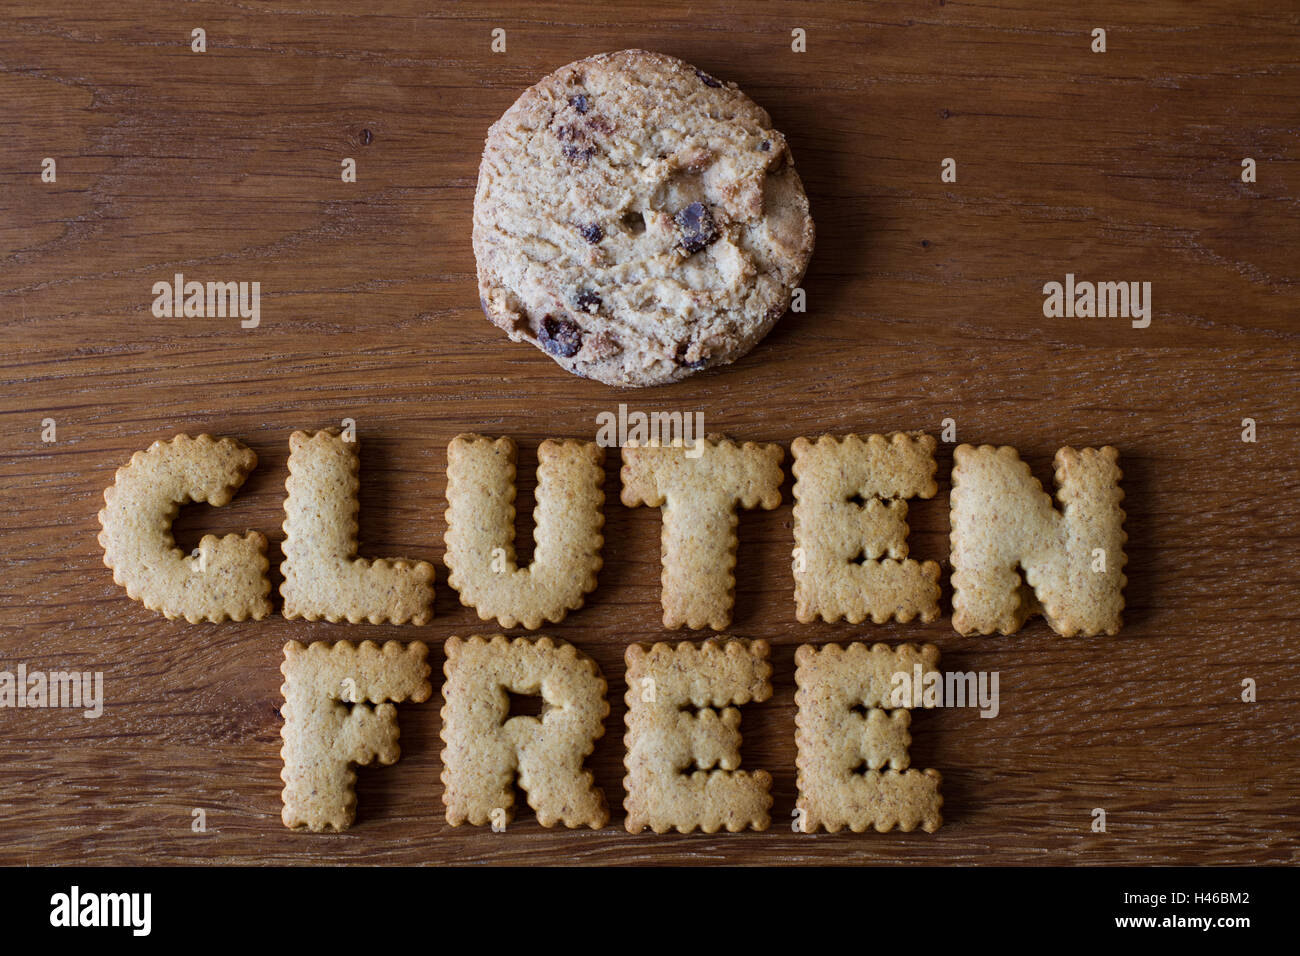 The food advice 'Gluten Free' spelled with alphabet shaped cookies alongside a stack of chocolate chip biscuits on wood. Stock Photo